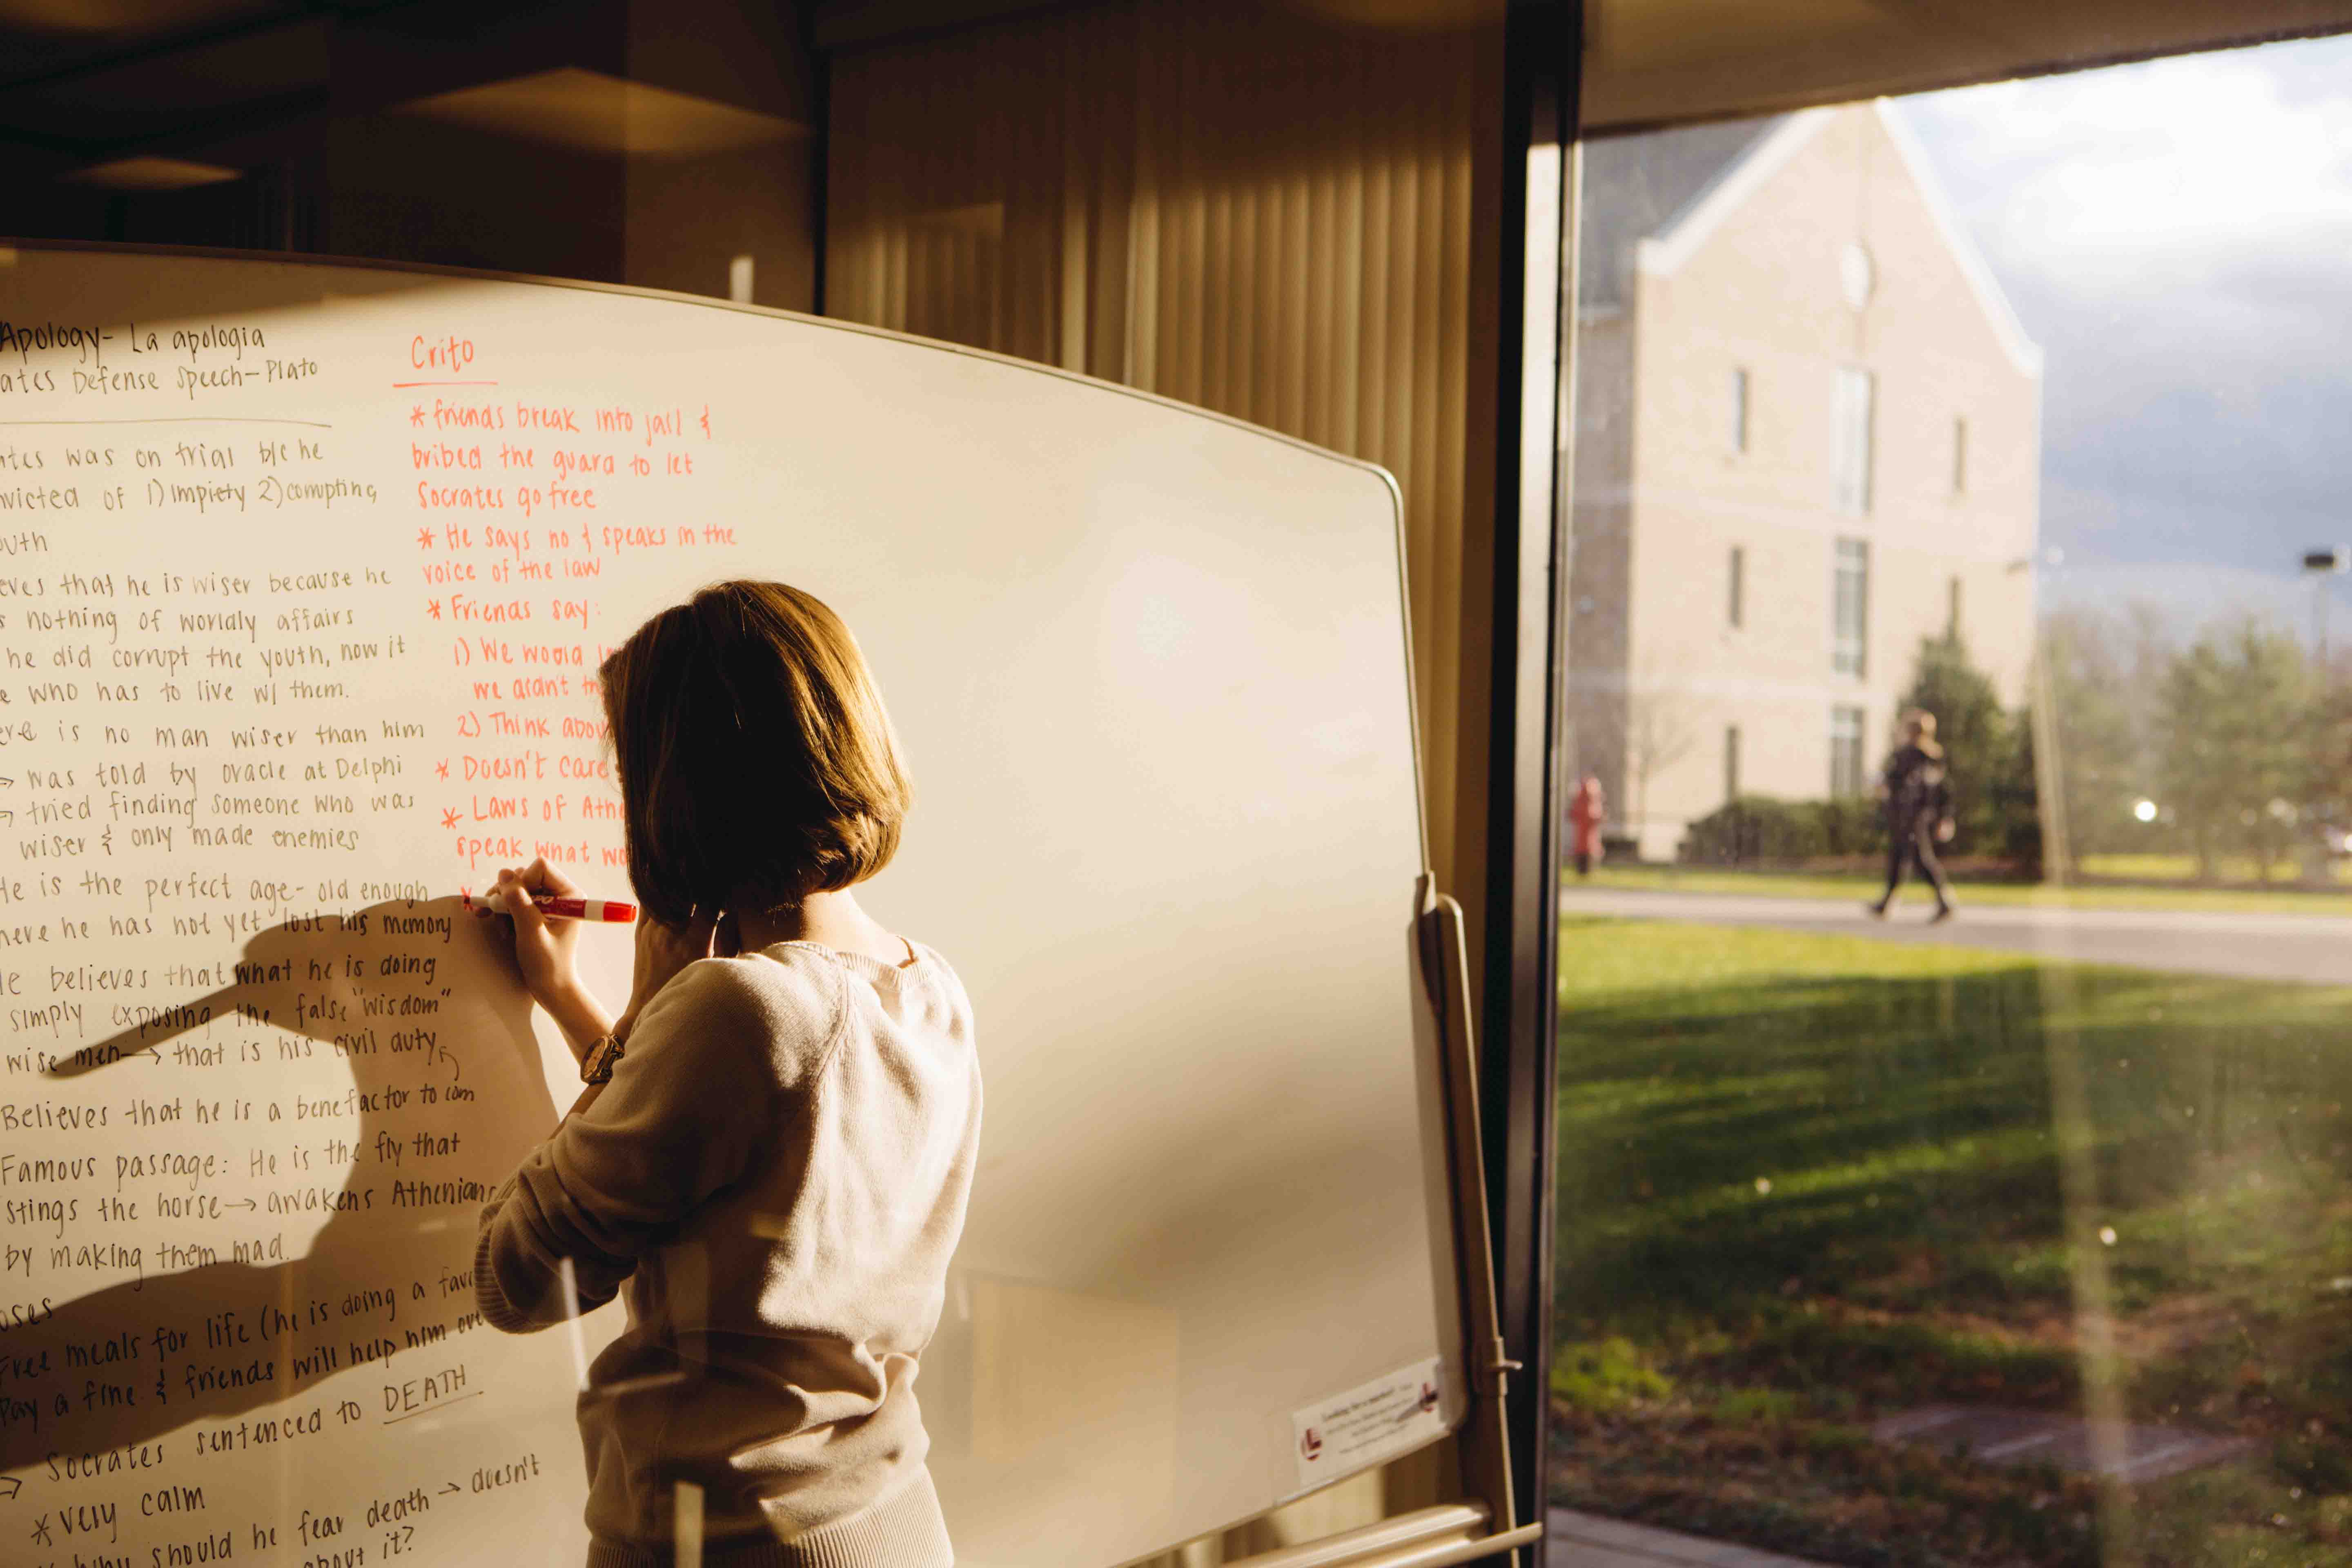 College student writing on a white board with campus in background.